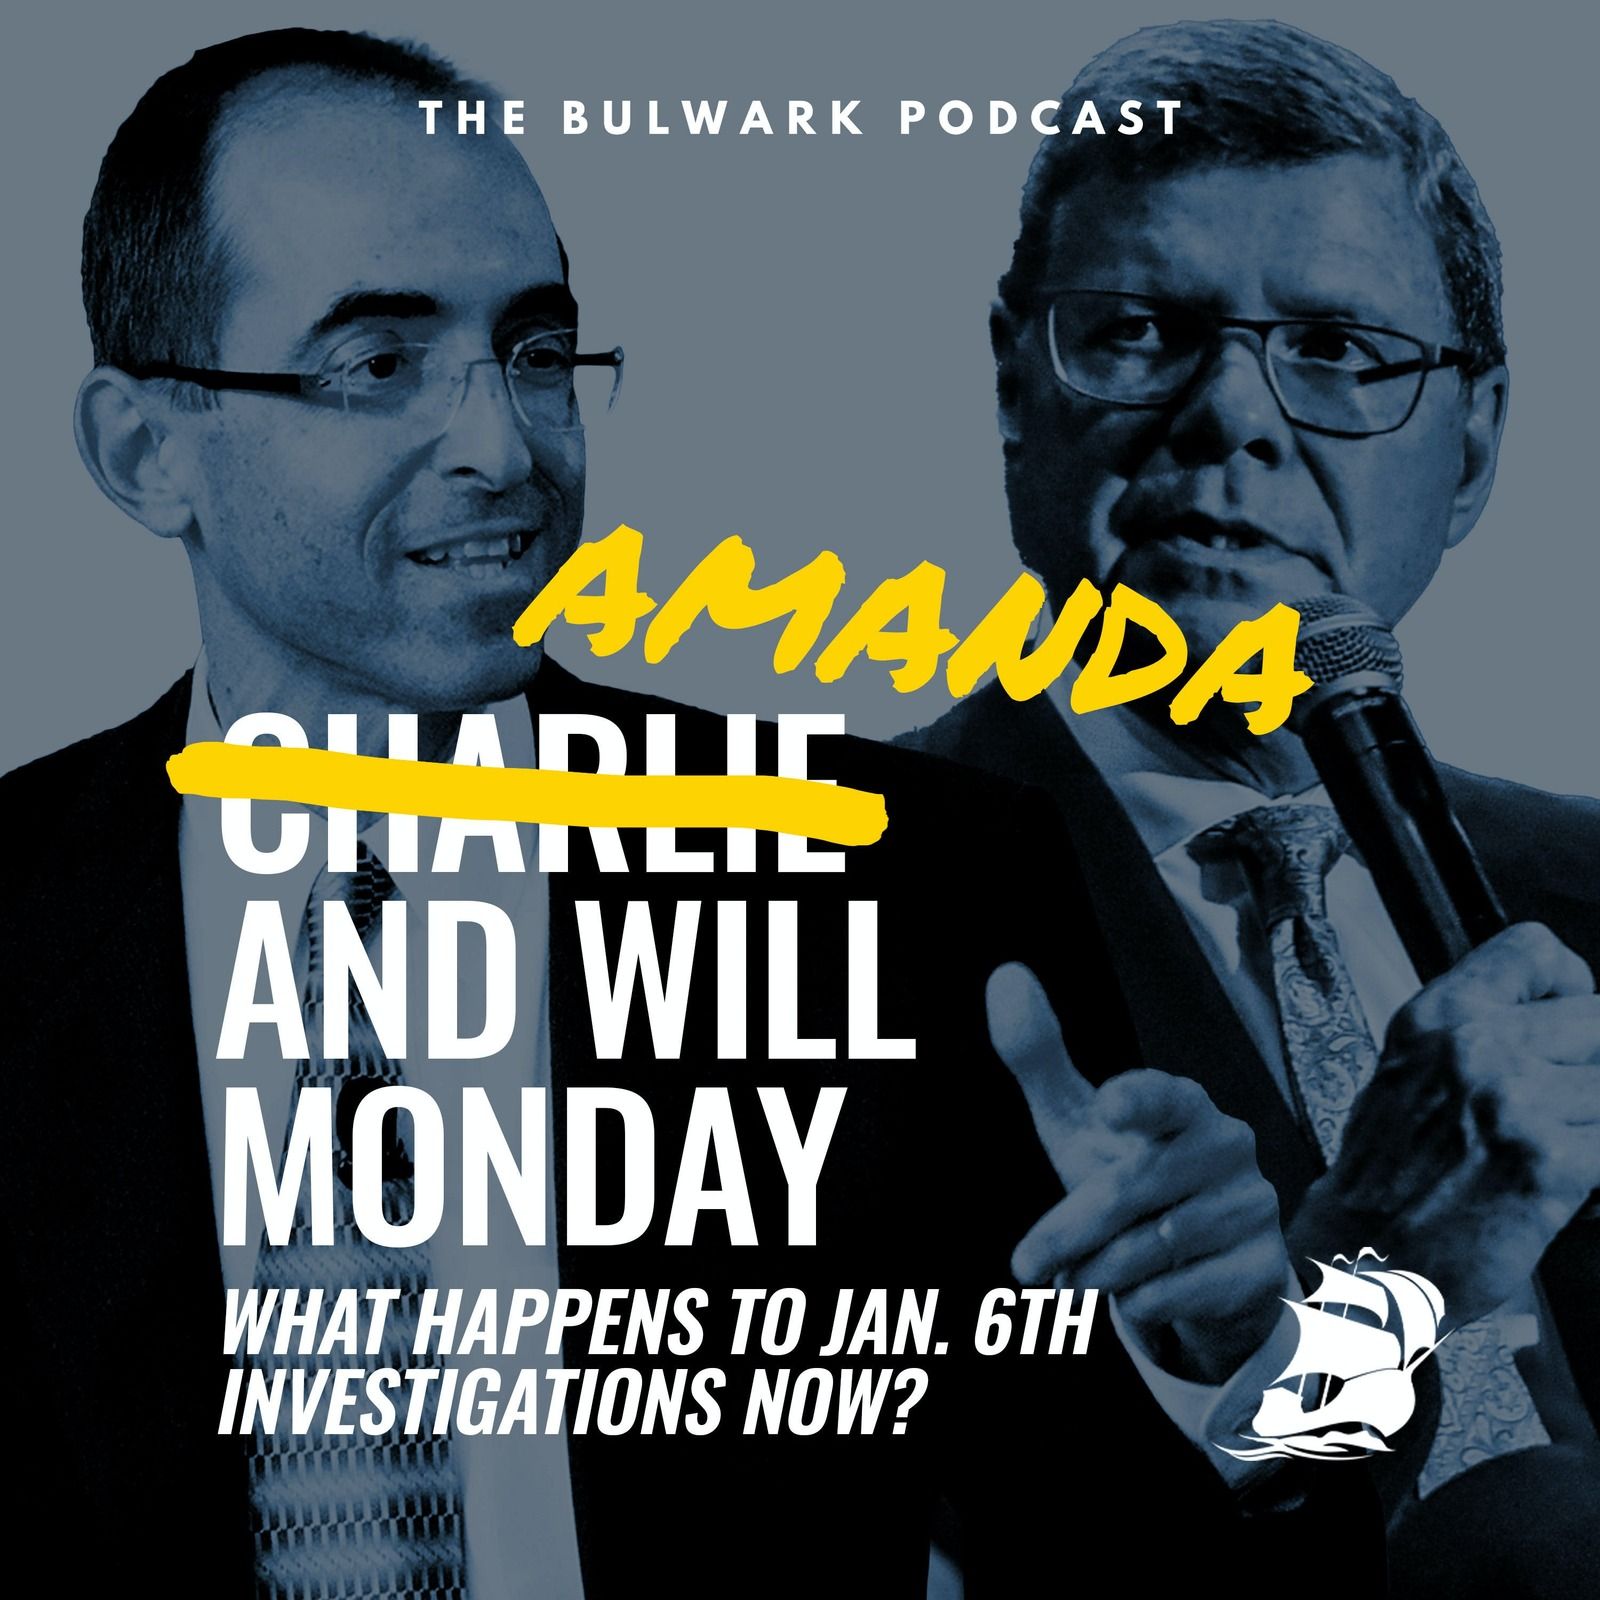 Will Saletan: What Happens to Jan. 6th Investigations Now? by The Bulwark Podcast